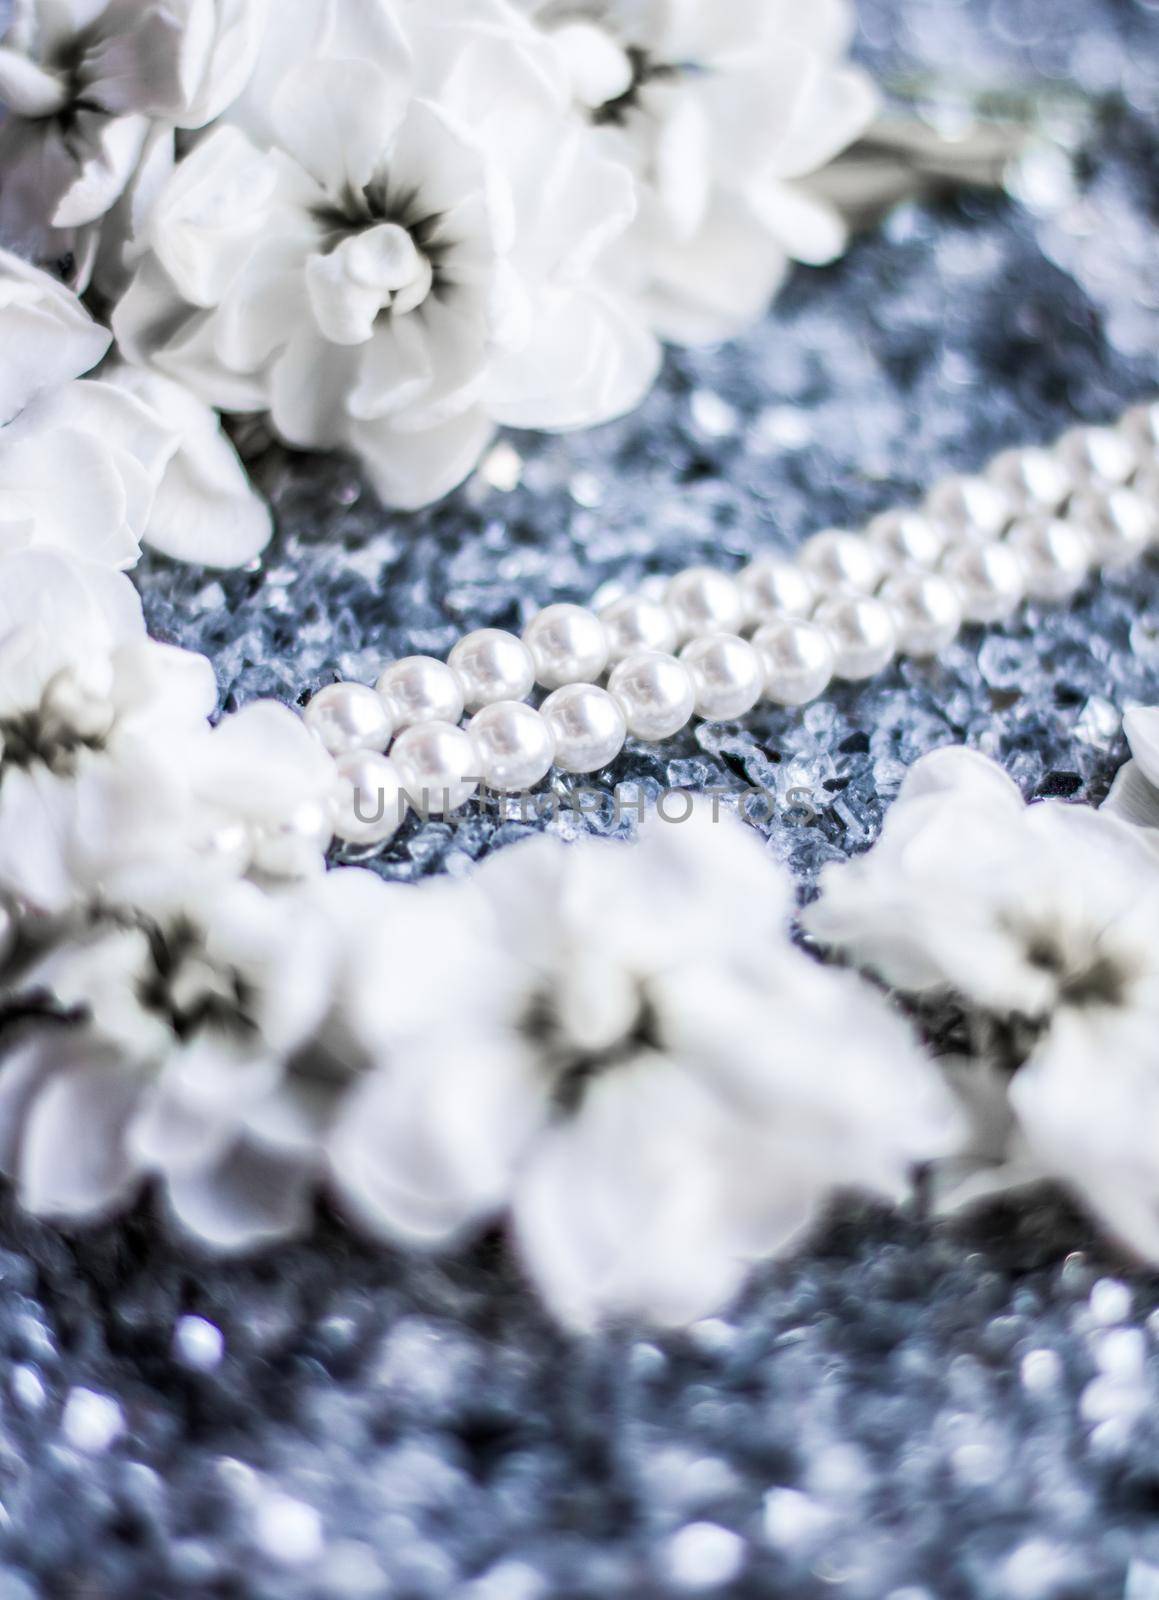 Pearl necklace, luxury jewellery background by Anneleven